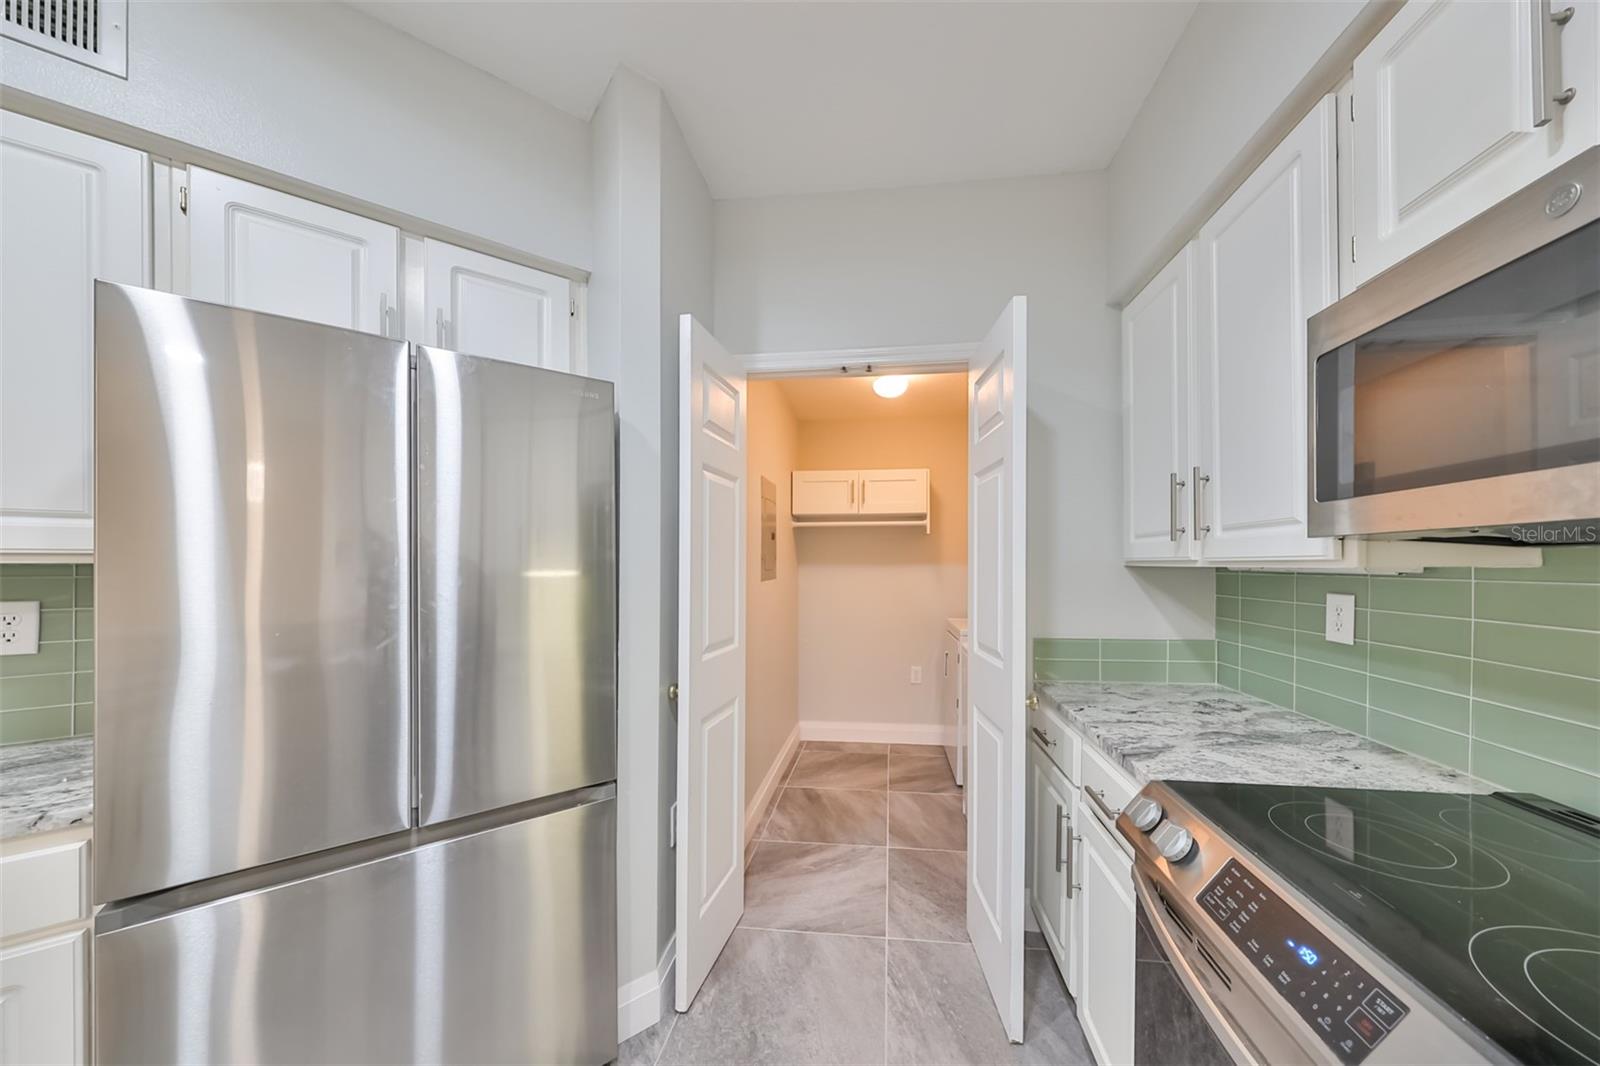 Spacious laundry room just off kitchen